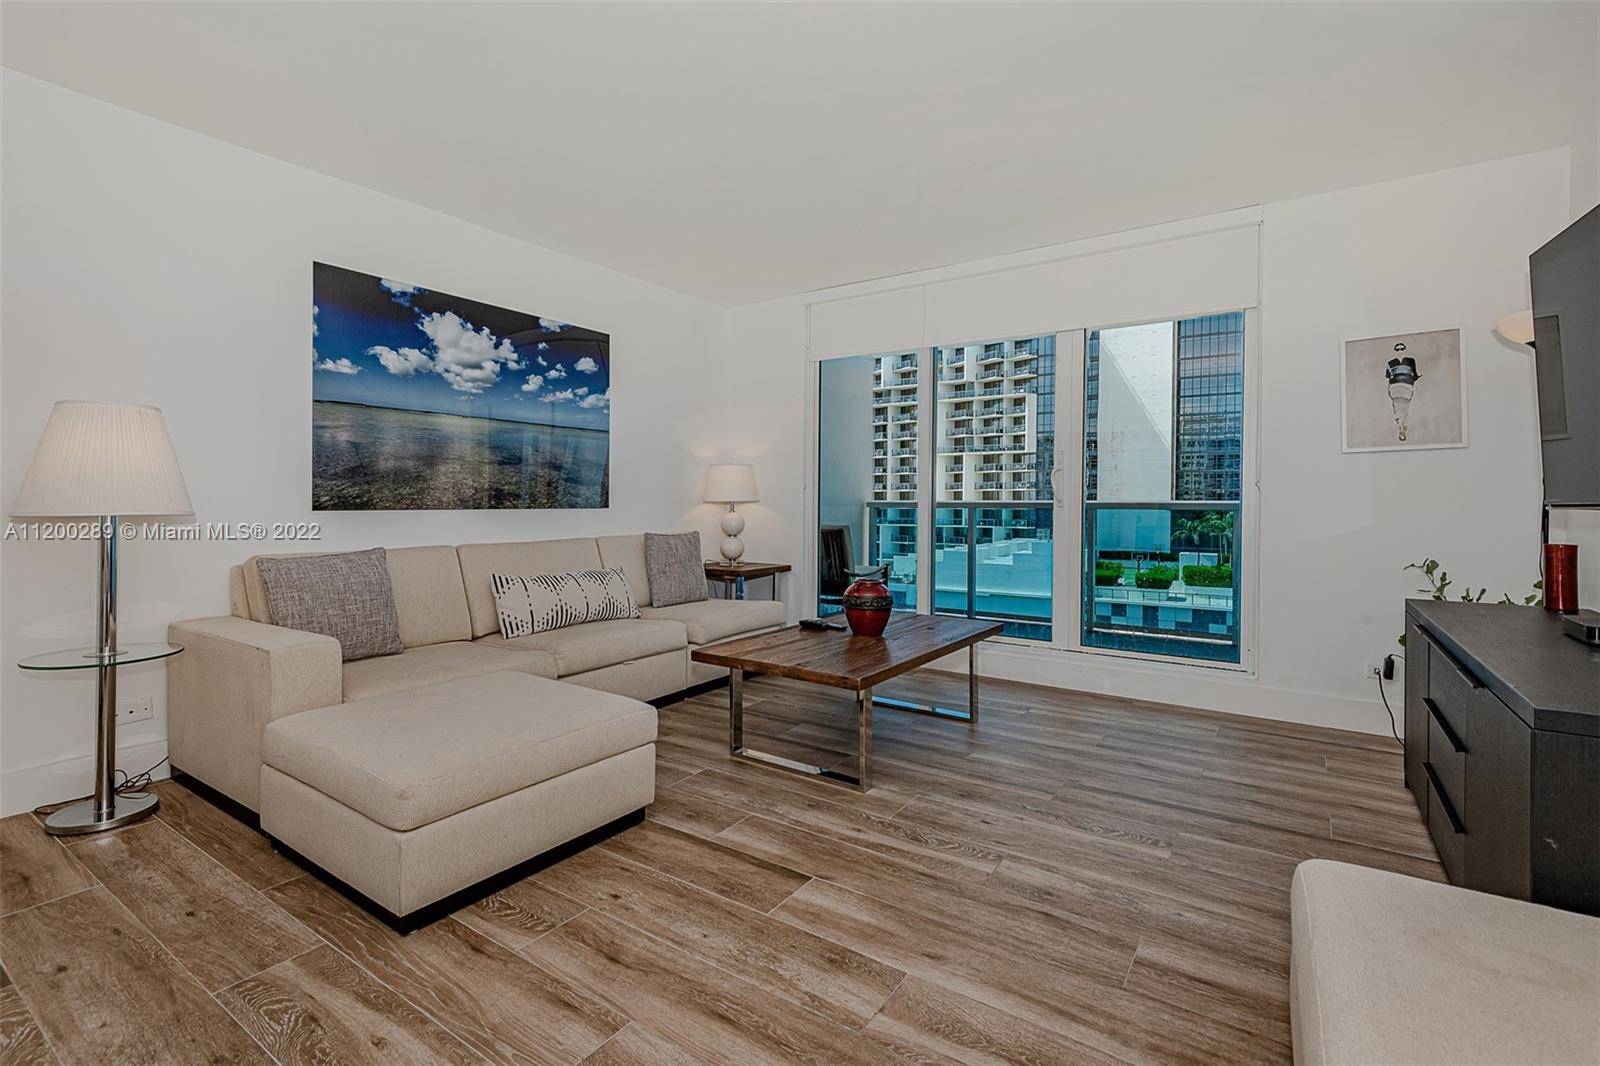 Discover this spacious, renovated 1 bed, 1 bath condo with ocean views, nestled in one of South Beach's chic oceanfront resorts.